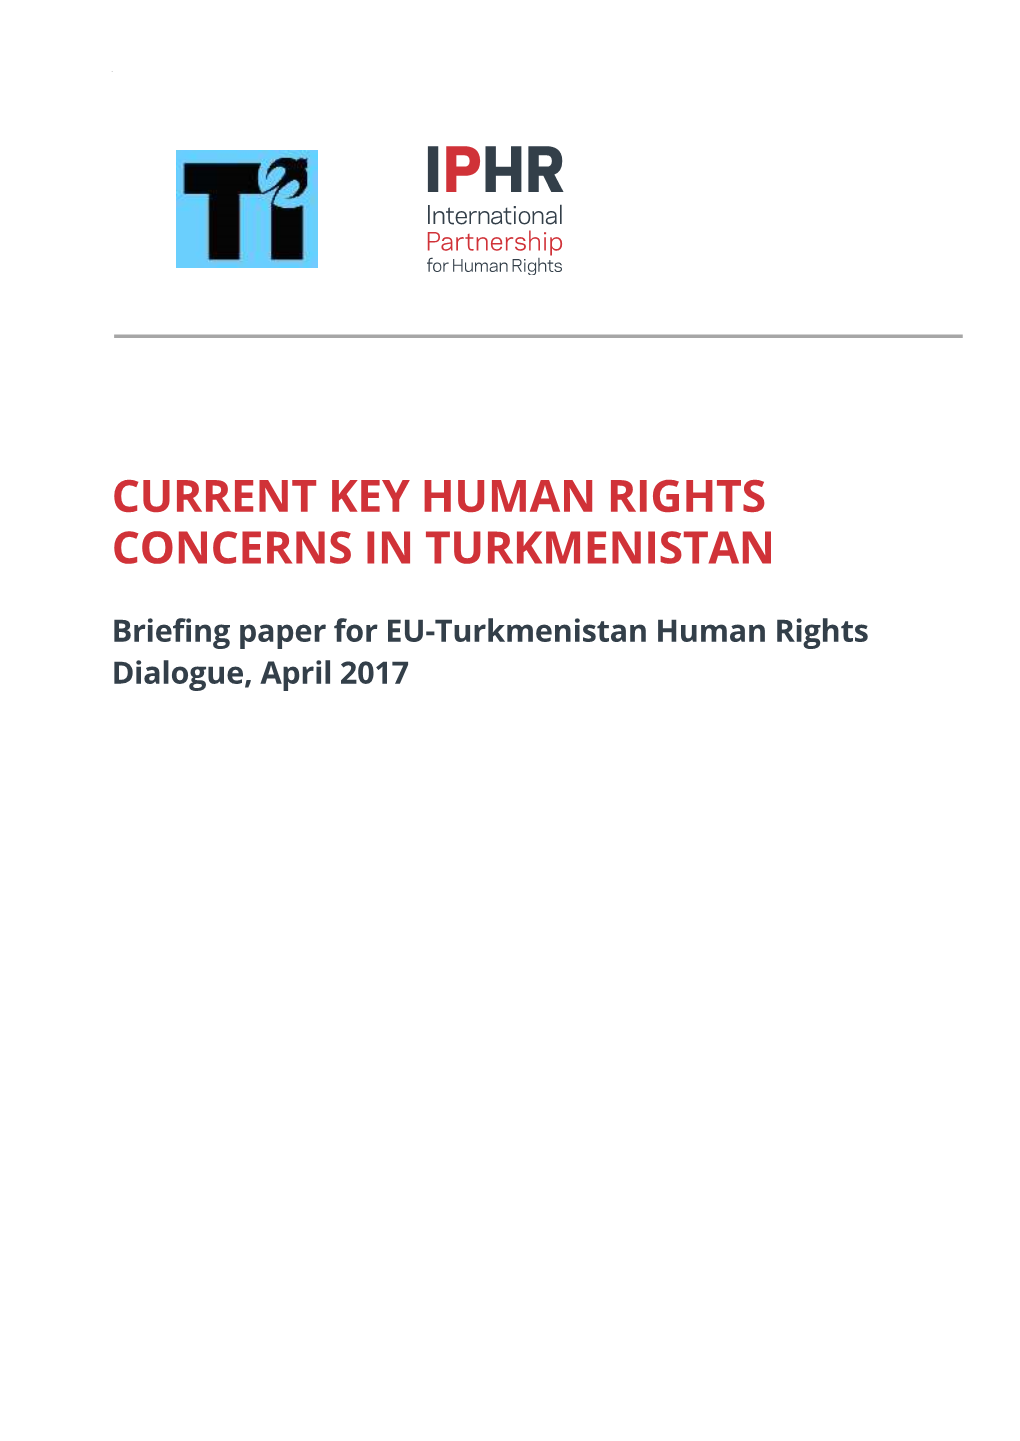 Current Key Human Rights Concerns in Turkmenistan